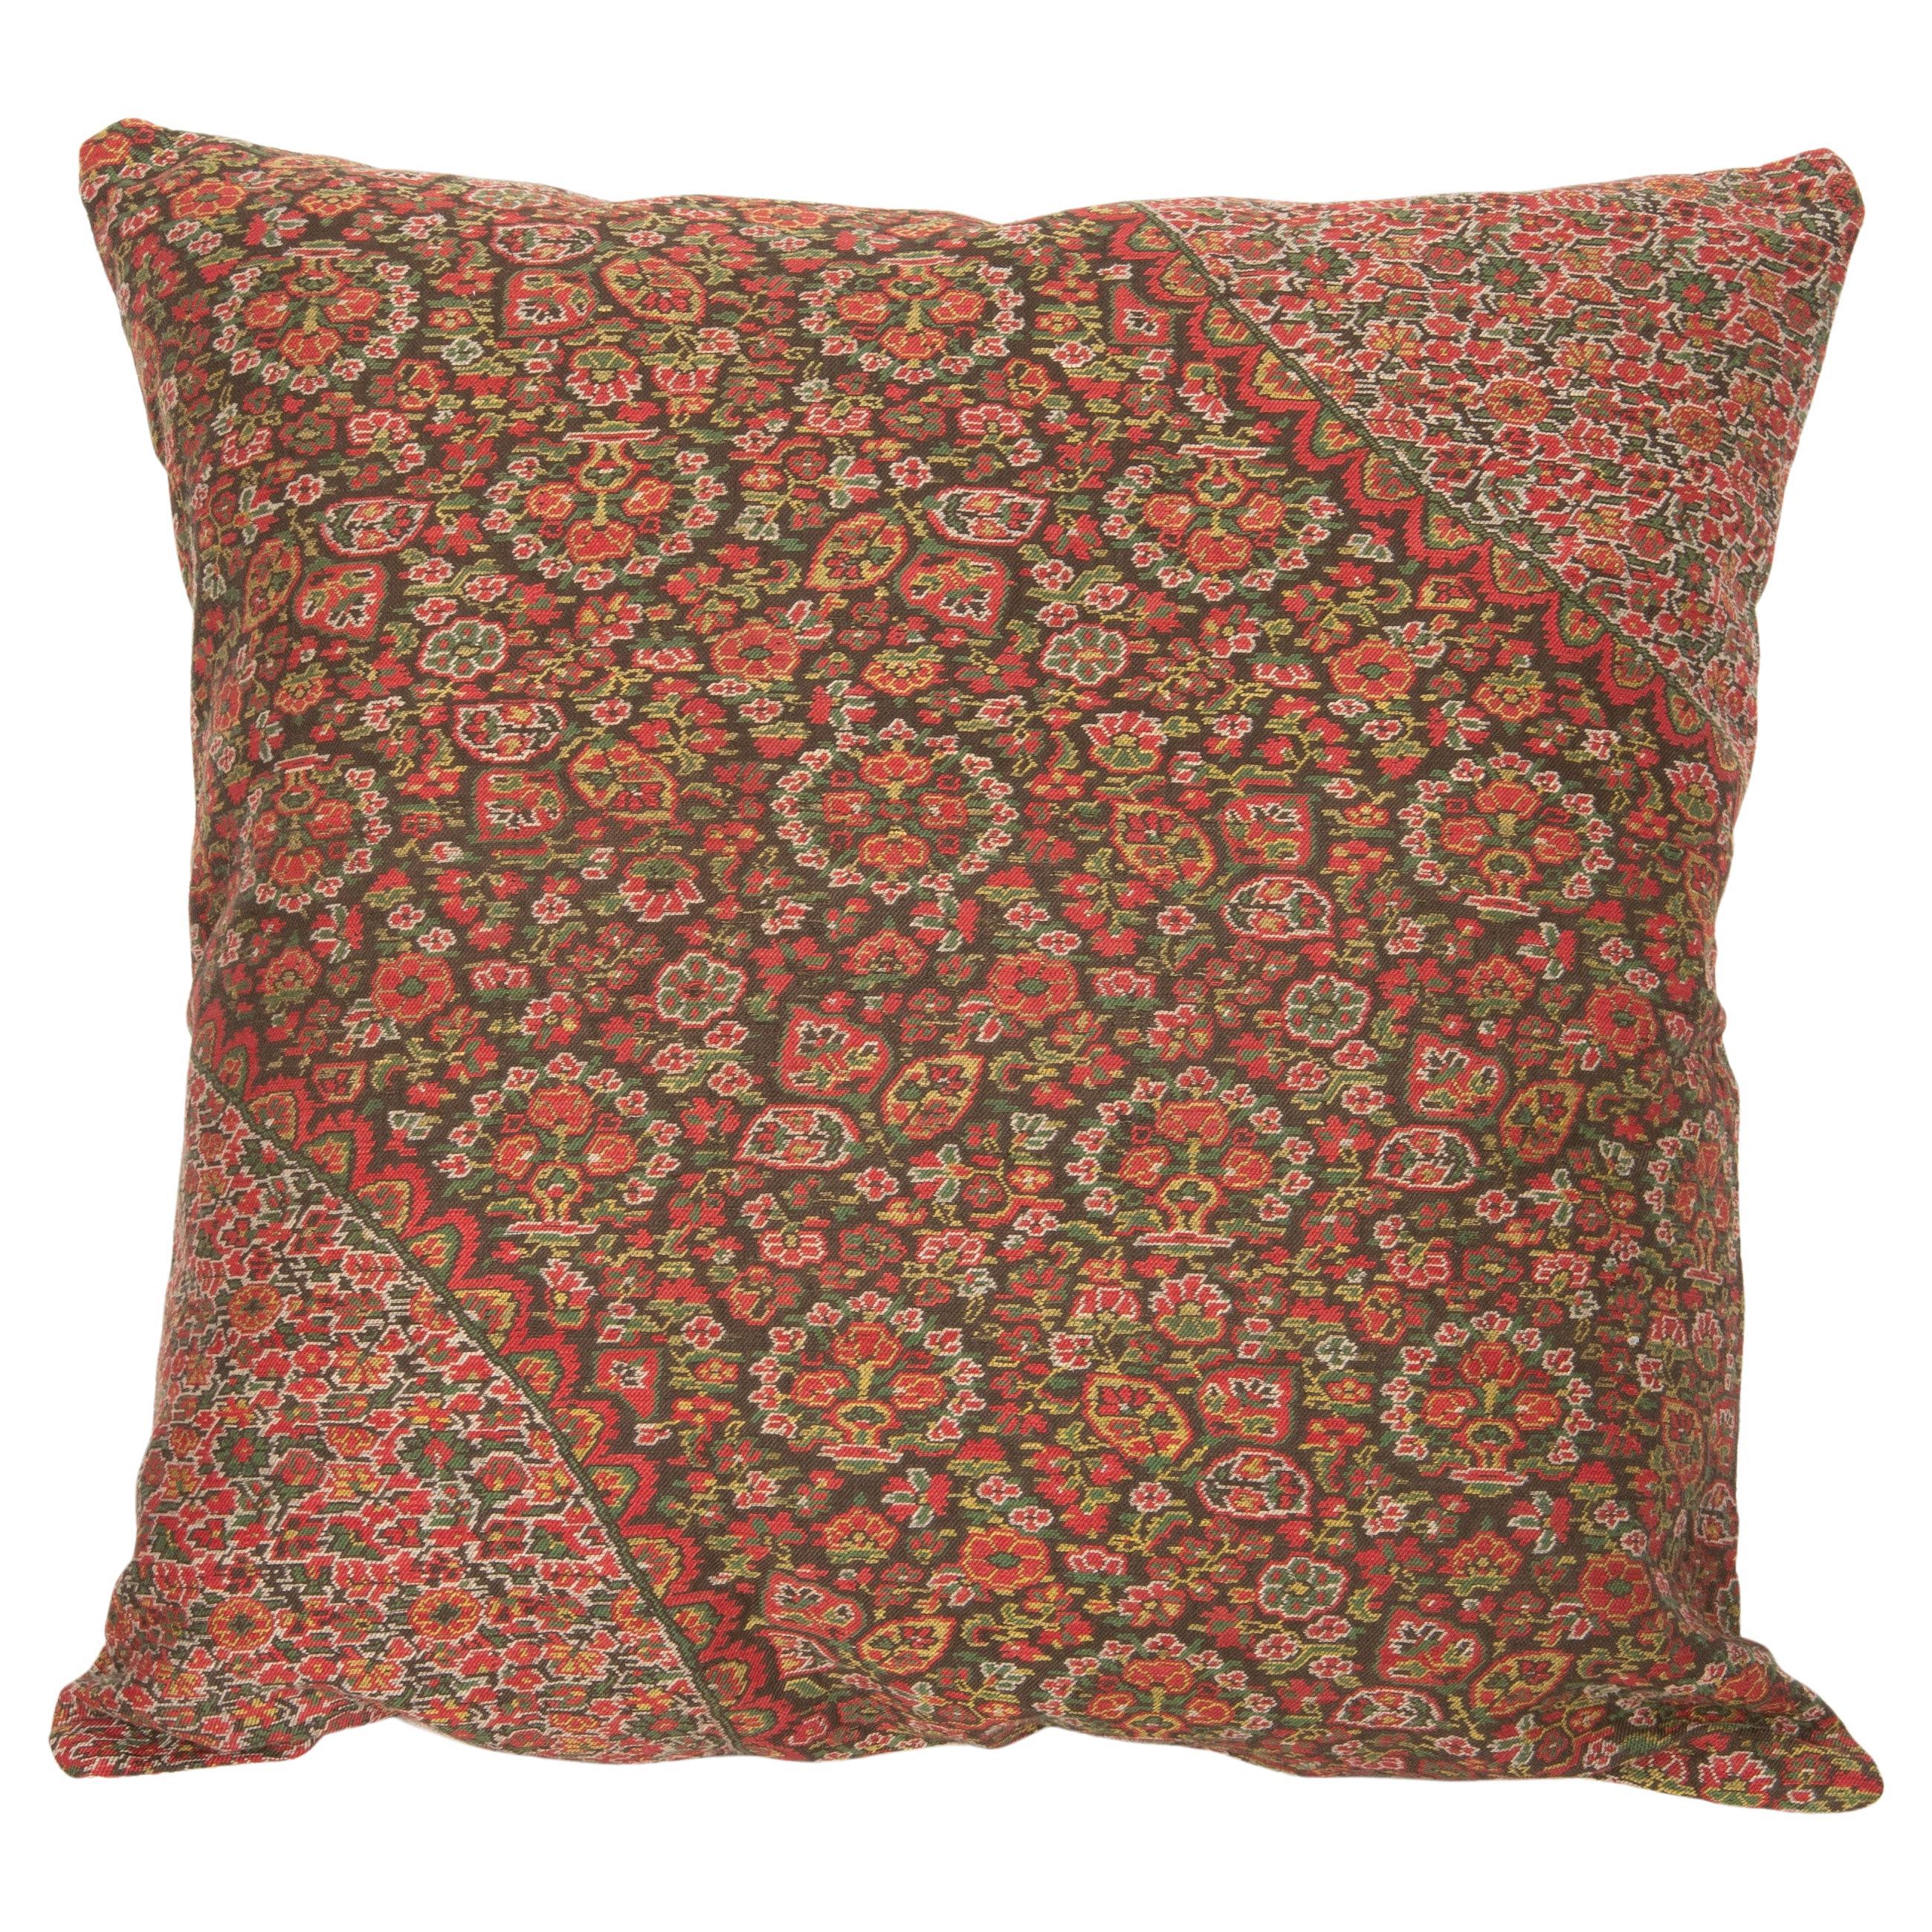 Antique Pillow Cover Made from a European Wool Paisley Shawl, L 19th/ E.20th C. For Sale